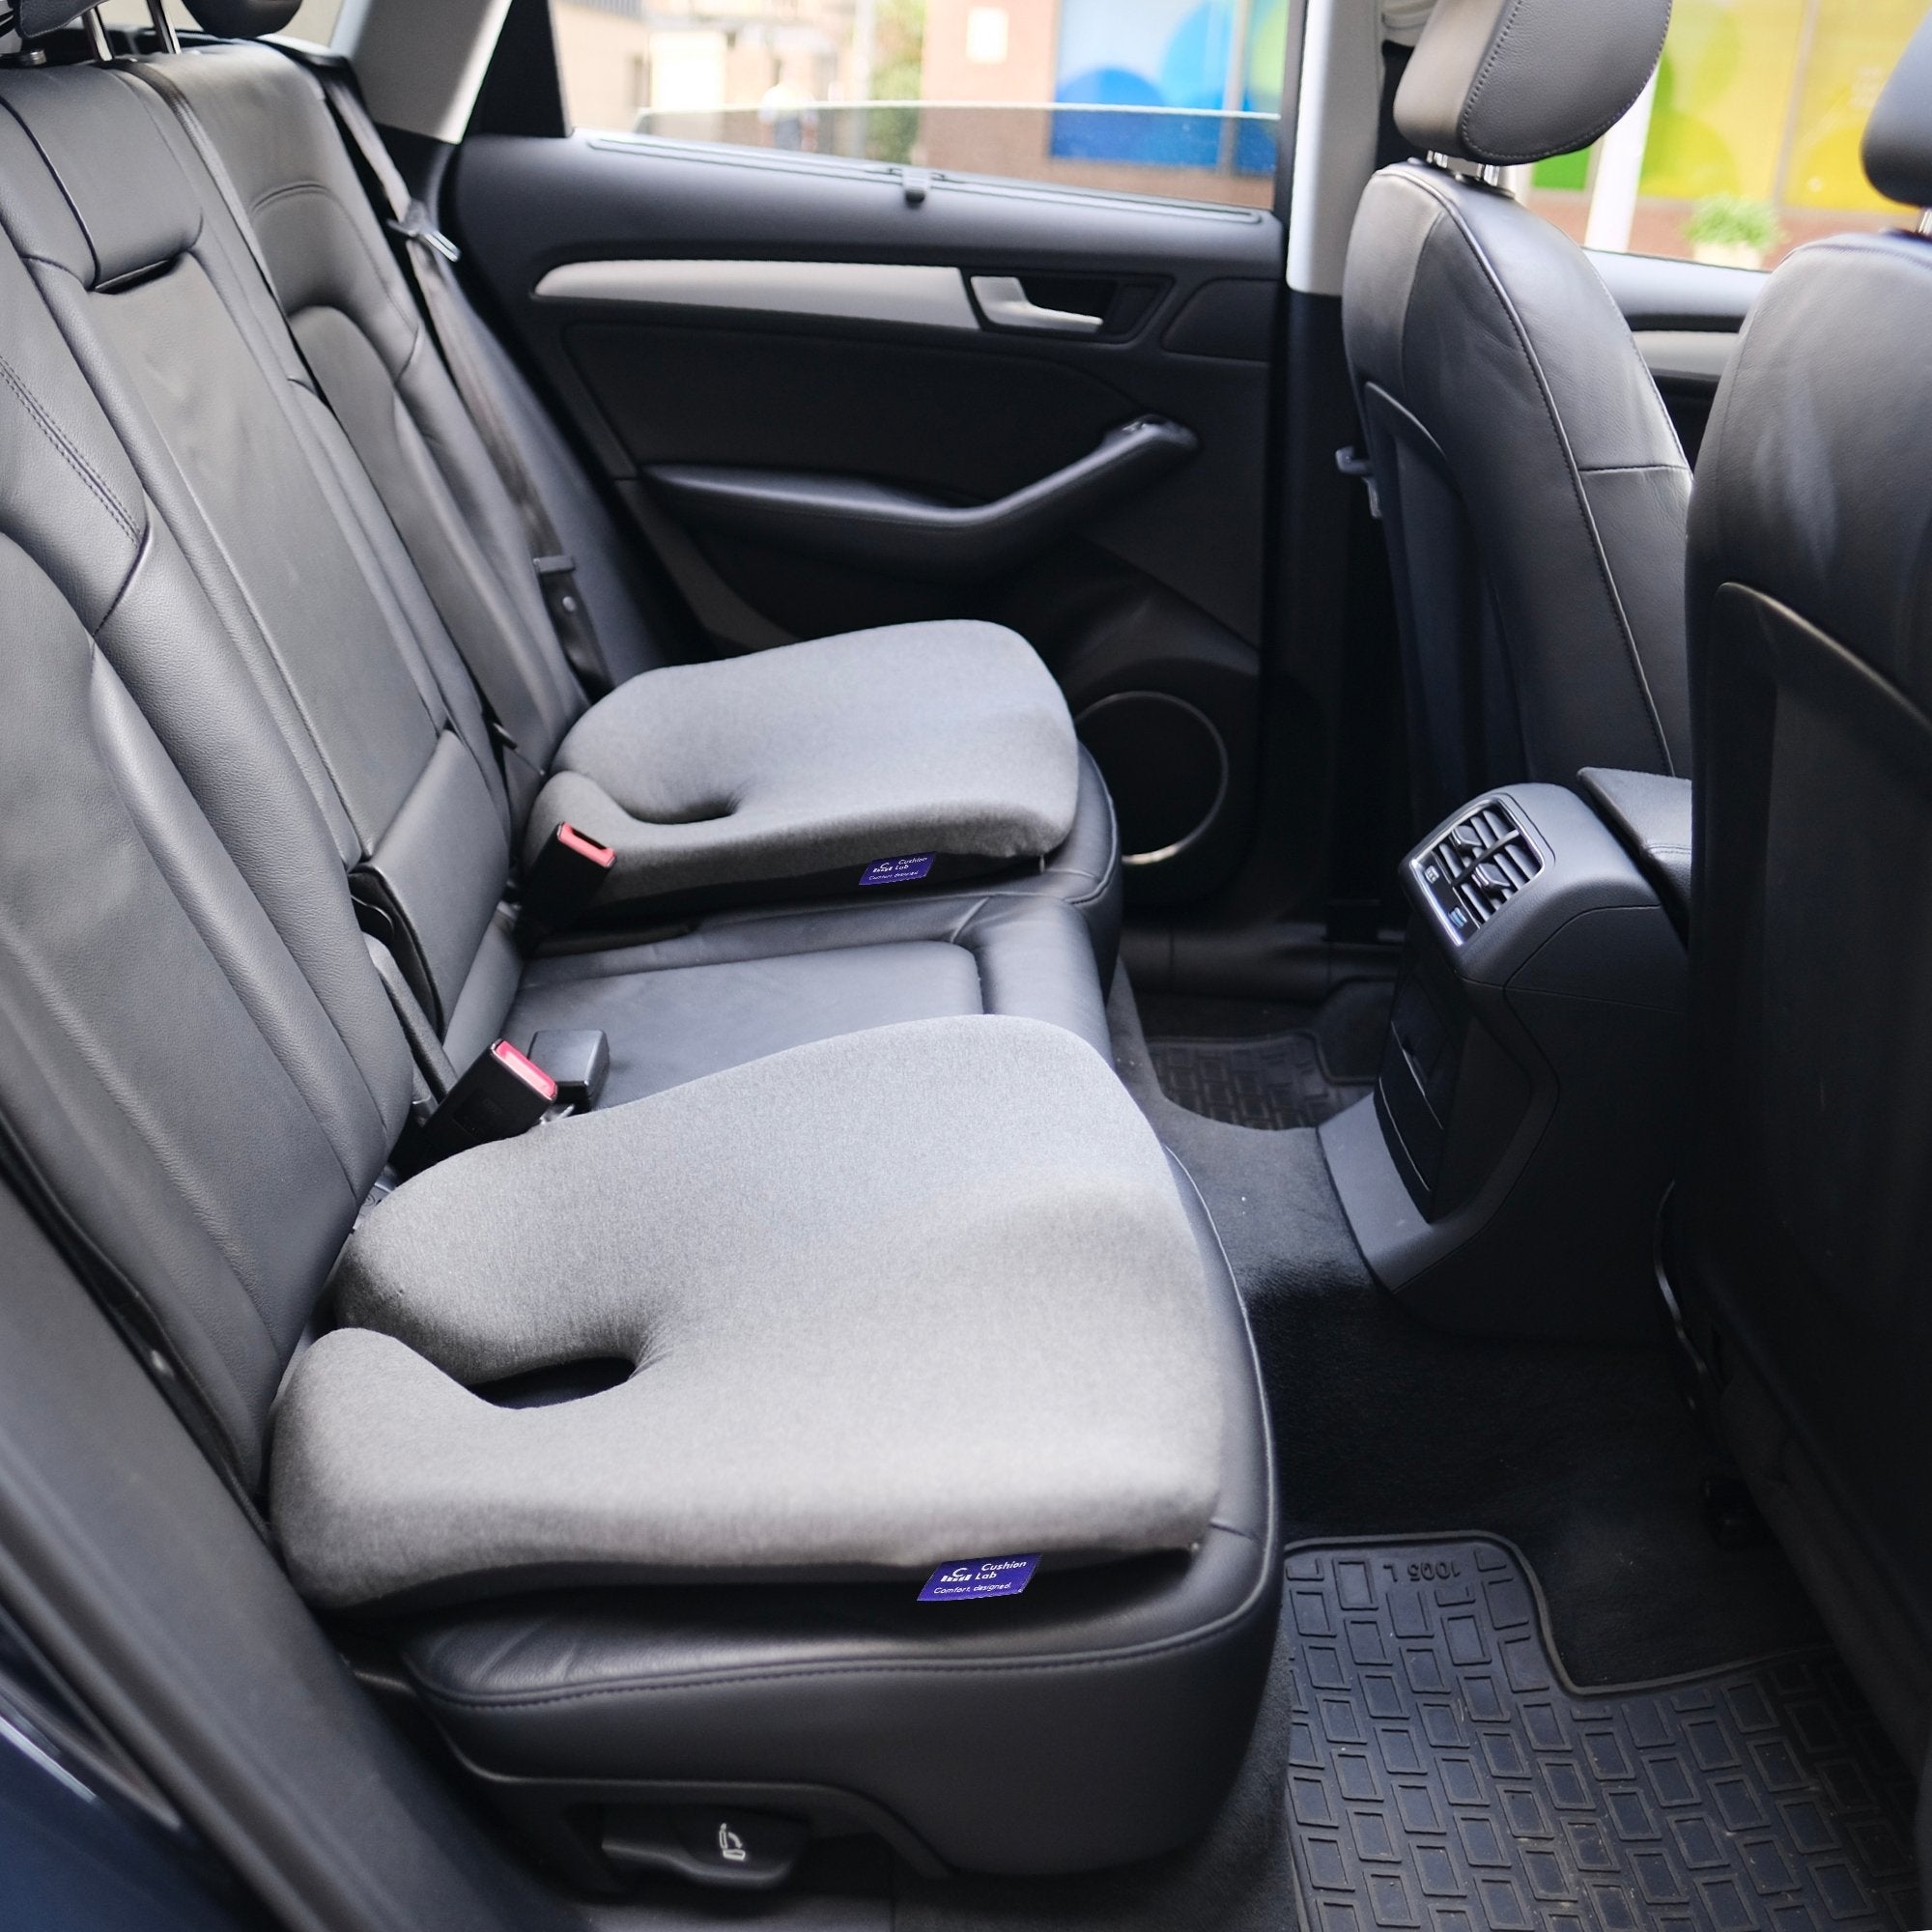 Innovative Pressure Relief Cushions for Enhanced Car Seat Comfort